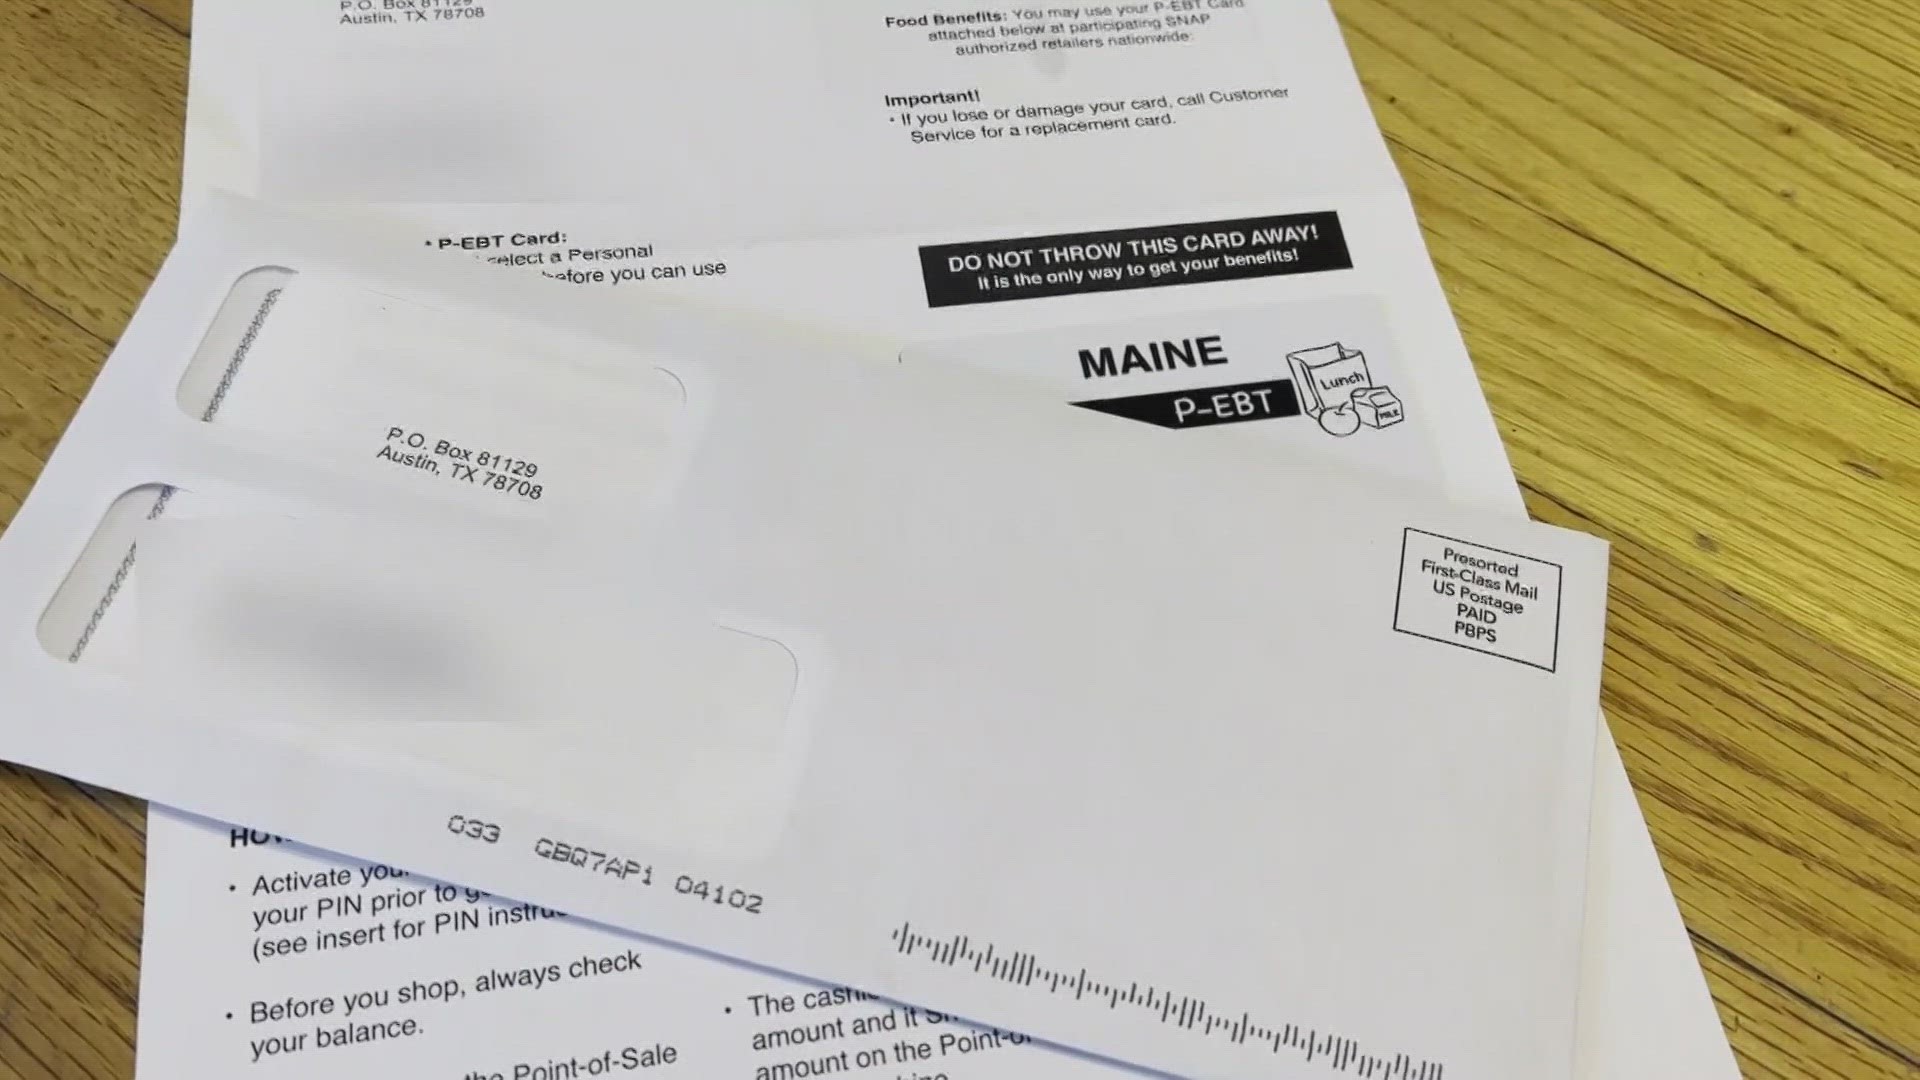 Yes, Maine families can use the P-EBT cards mailed to their kids